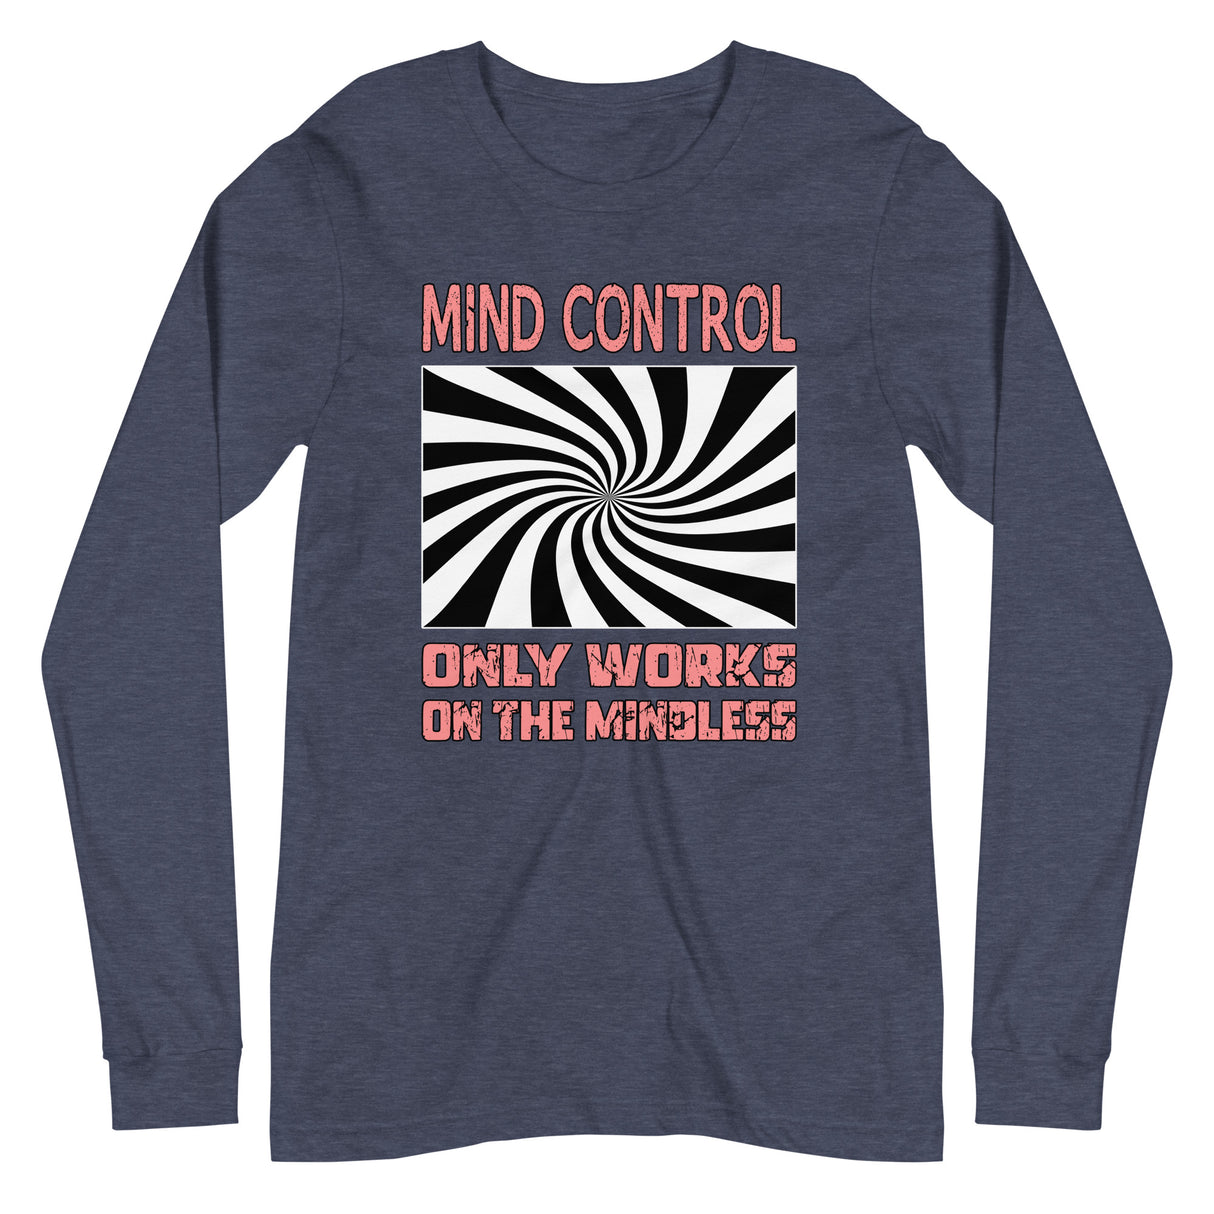 Mind Control Only Works on The Mindless Long Sleeve Shirt